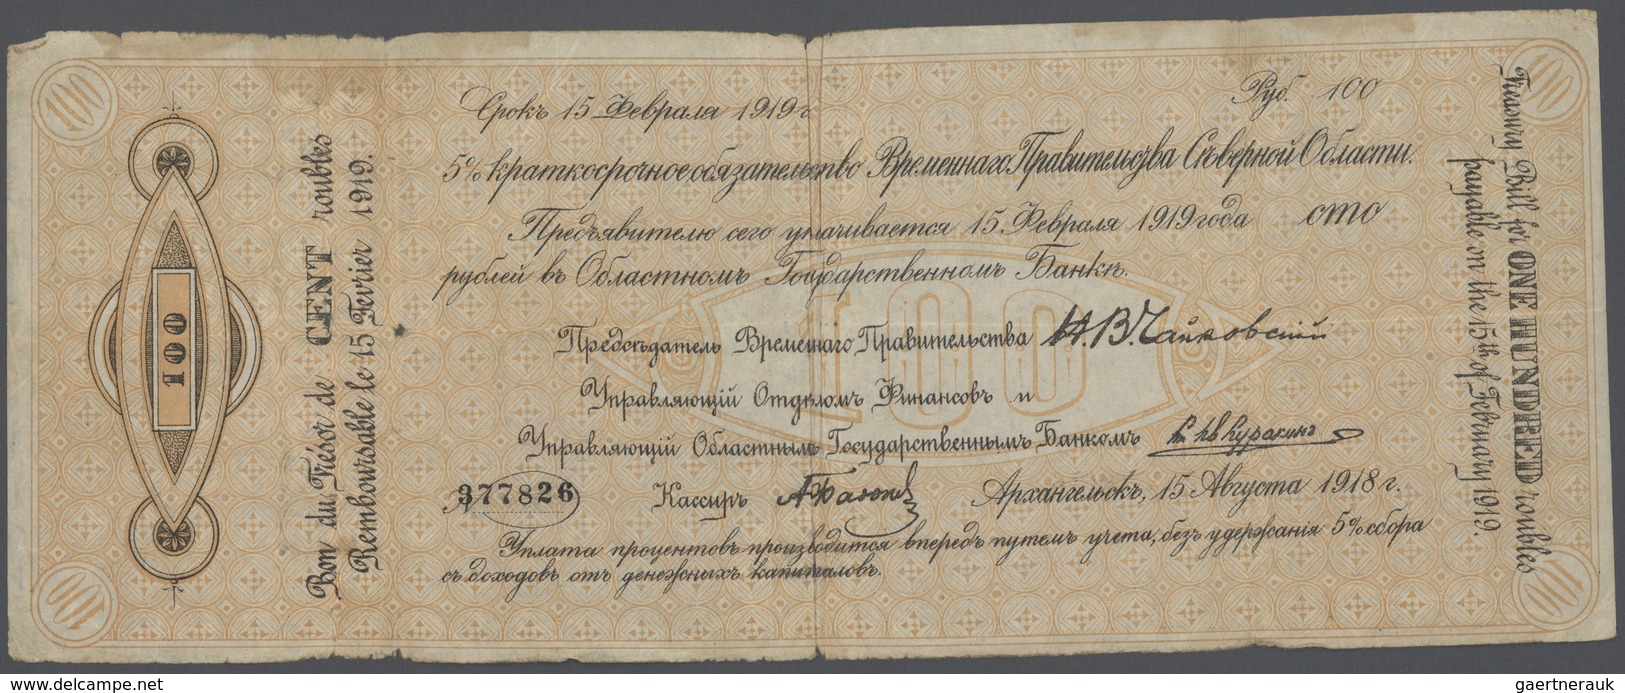 Russia / Russland: Nice set with 6 Banknotes comprising 50, 100 and 2 x 500 Rubles Debenture Bonds i